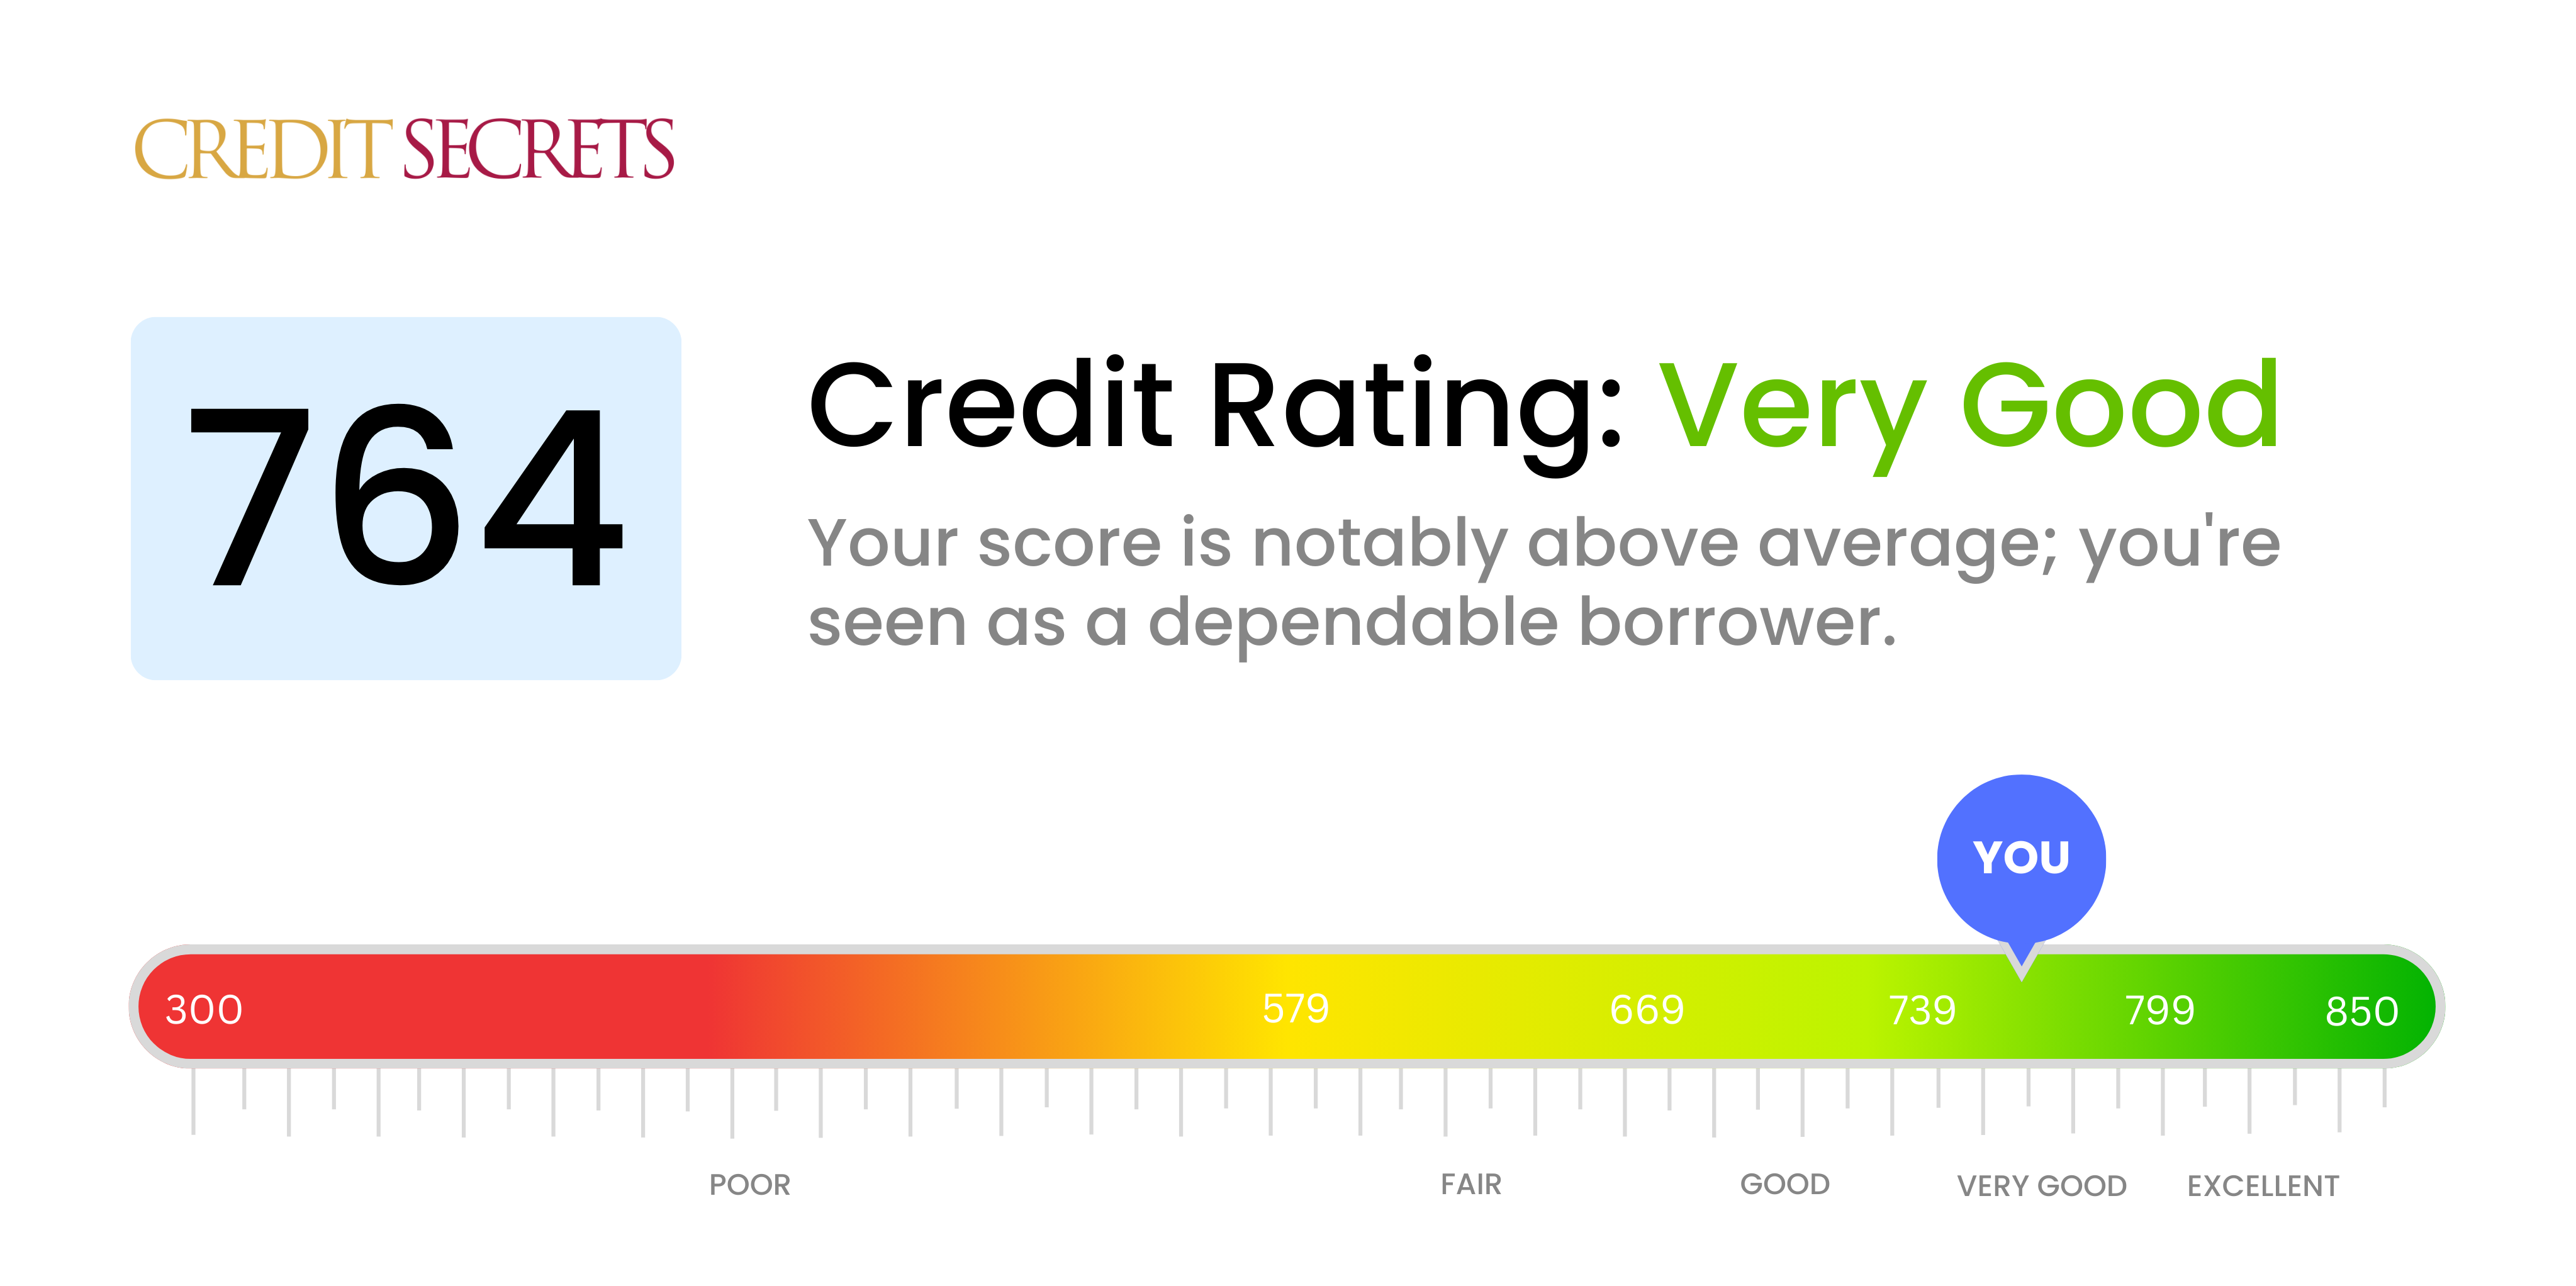 Is 764 a good credit score?